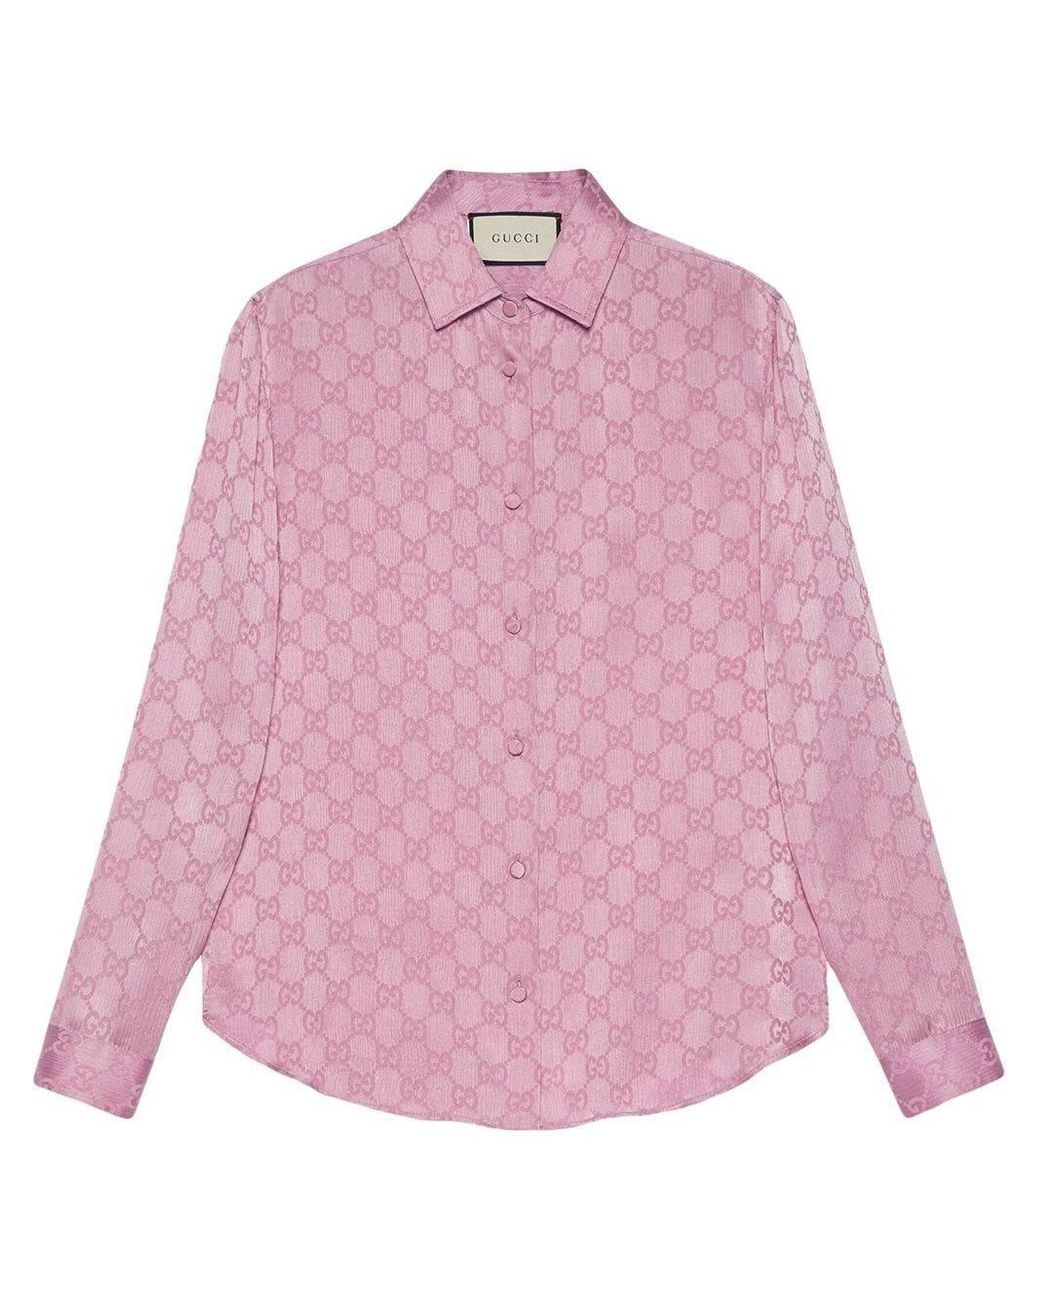 Gucci GG Monogram Printed Shirt in Pink | Lyst